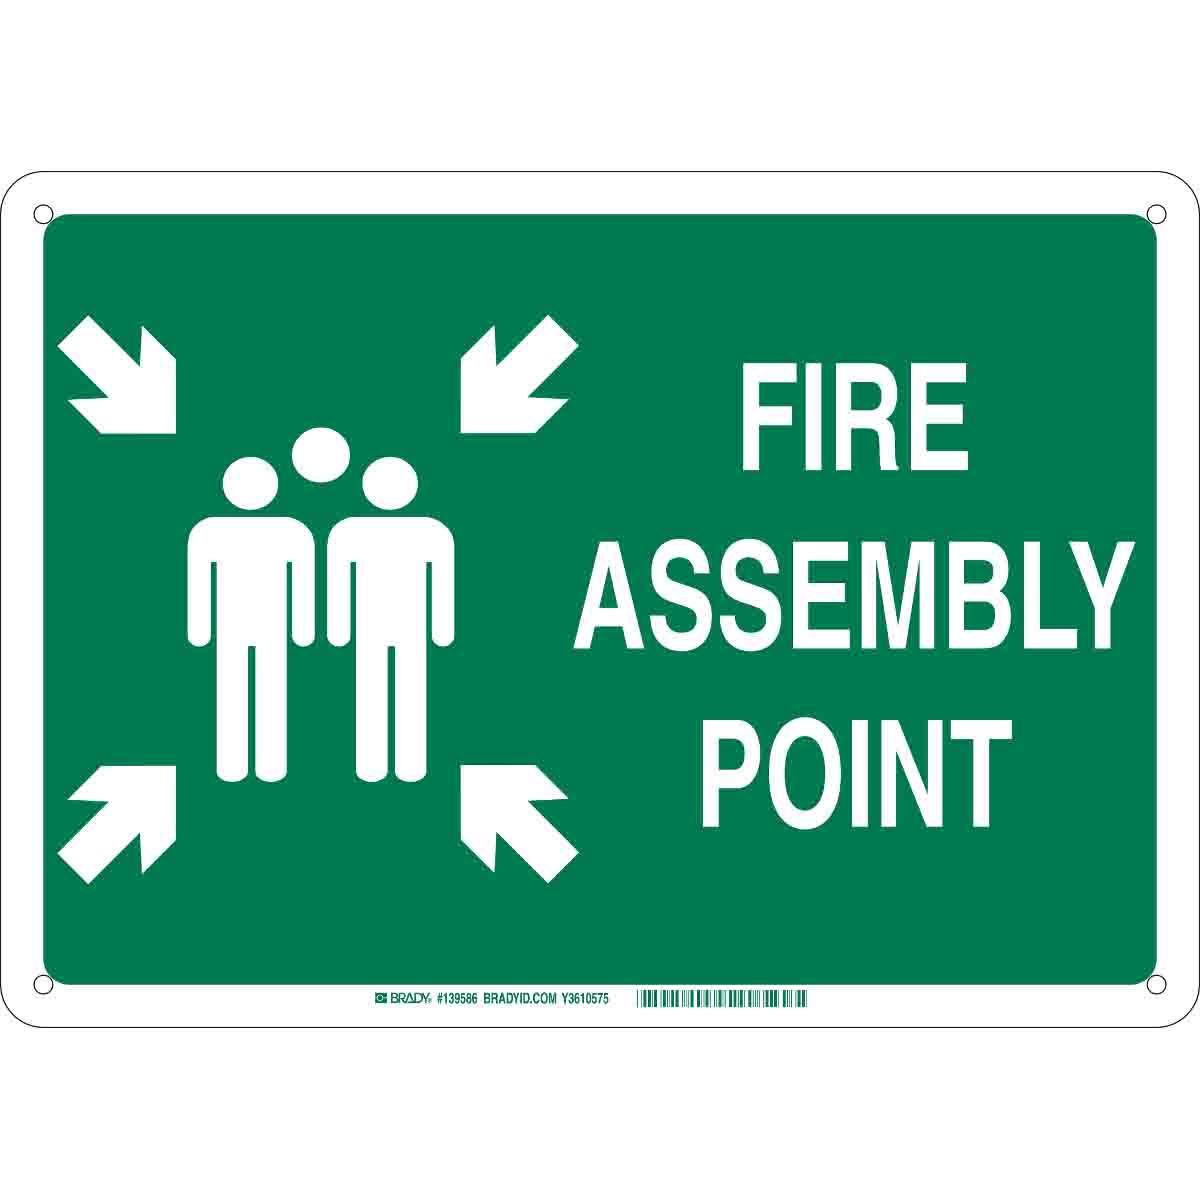 FIRE ASSEMBLY POINT SAFETY SIGN 